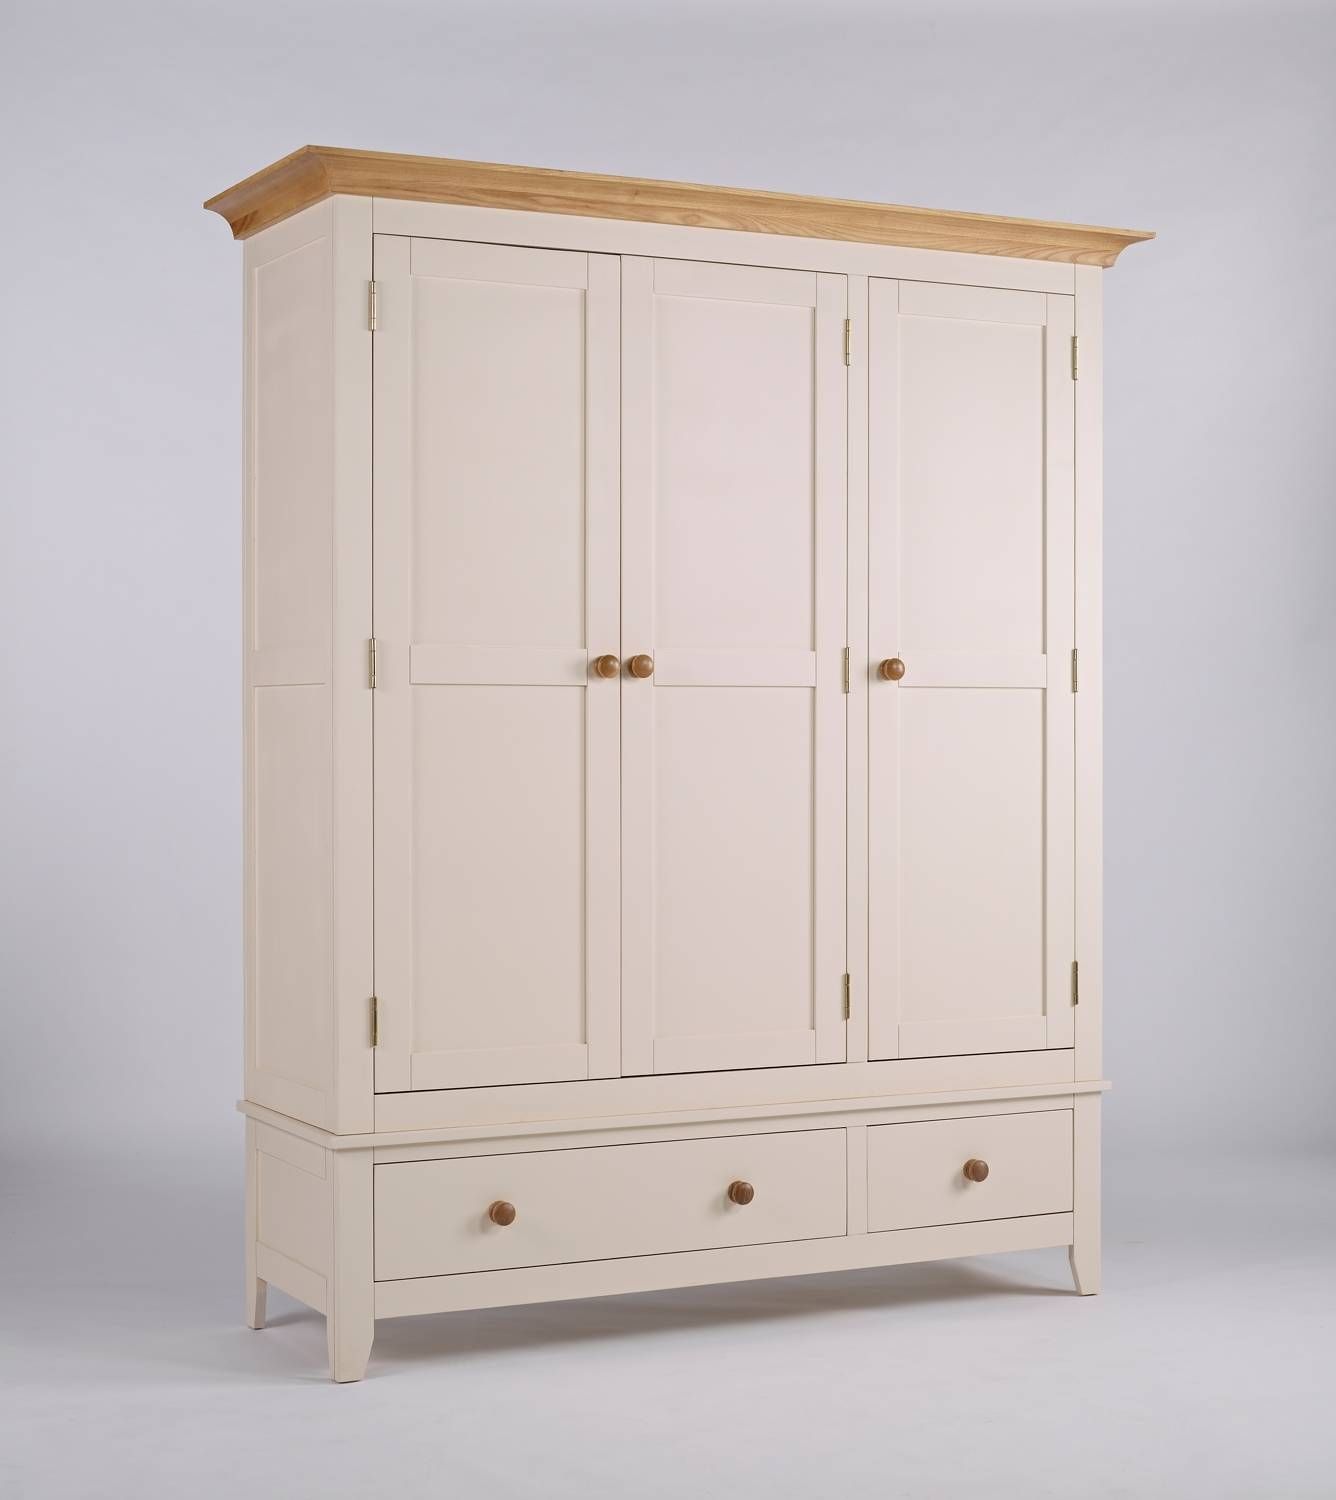 Camden Painted Pine & Ash Triple Wardrobe With Drawers Intended For Pine Wardrobes With Drawers (View 12 of 15)